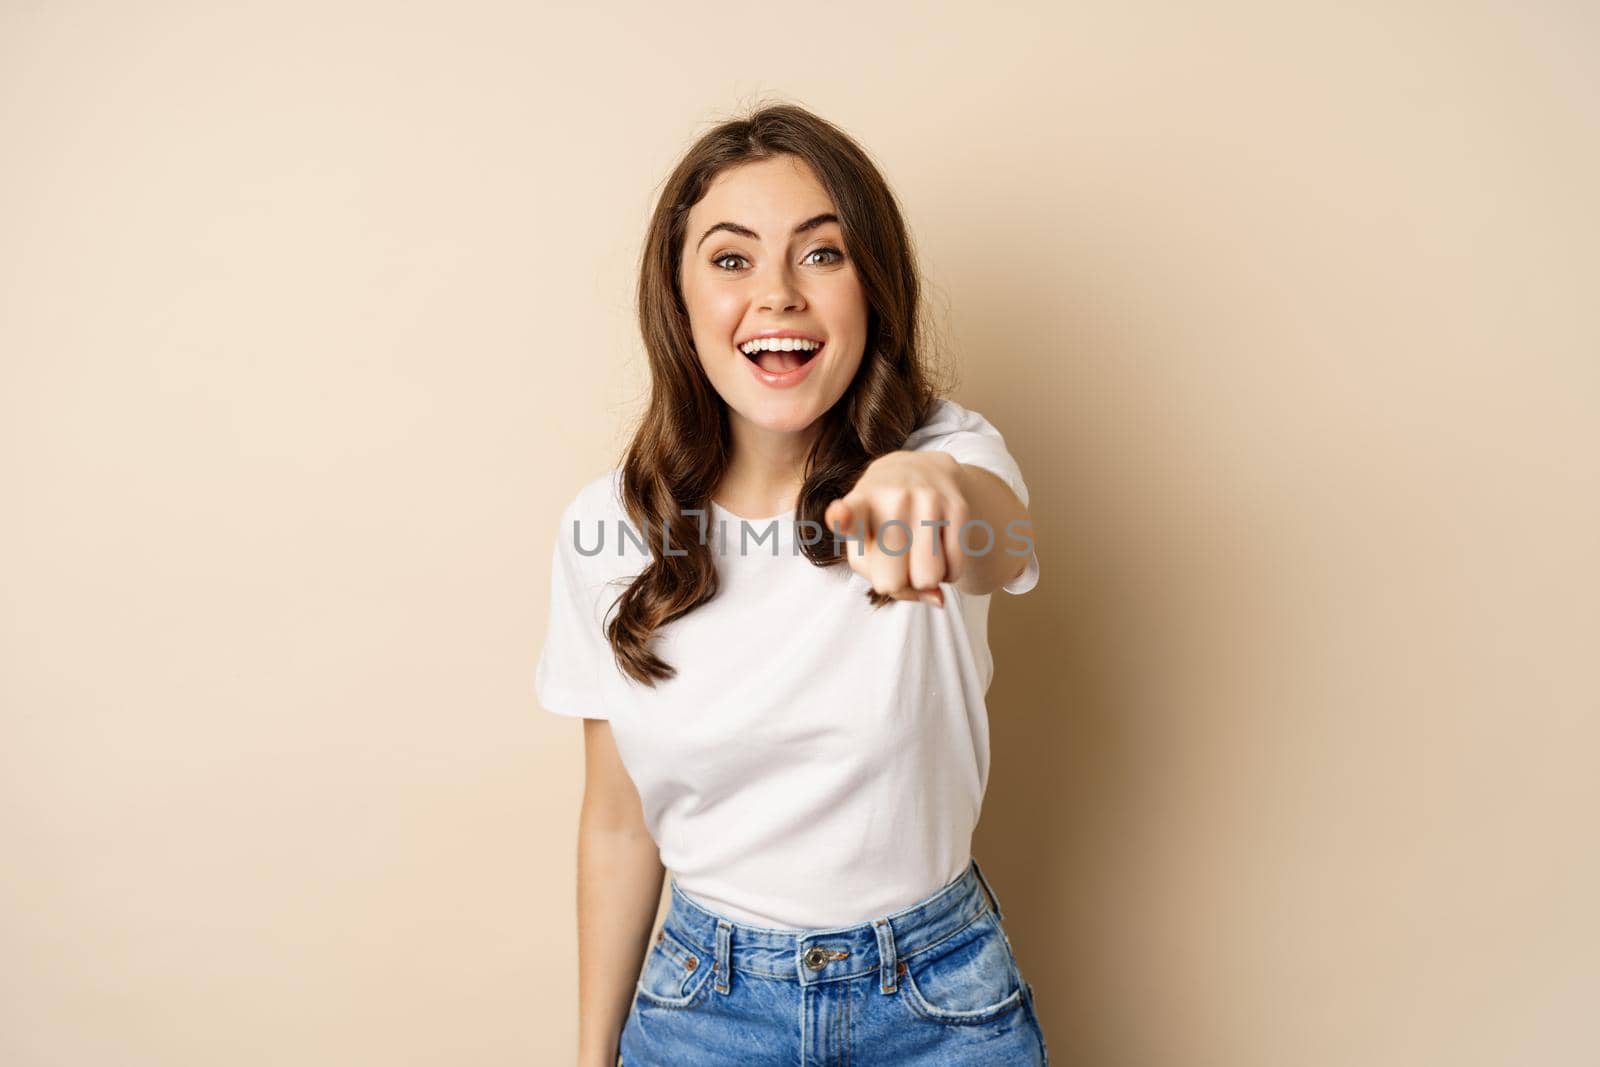 Its you, congrats. Smiling beautiful woman pointing finger at camera, congratulating, praising you, standing over beige background.